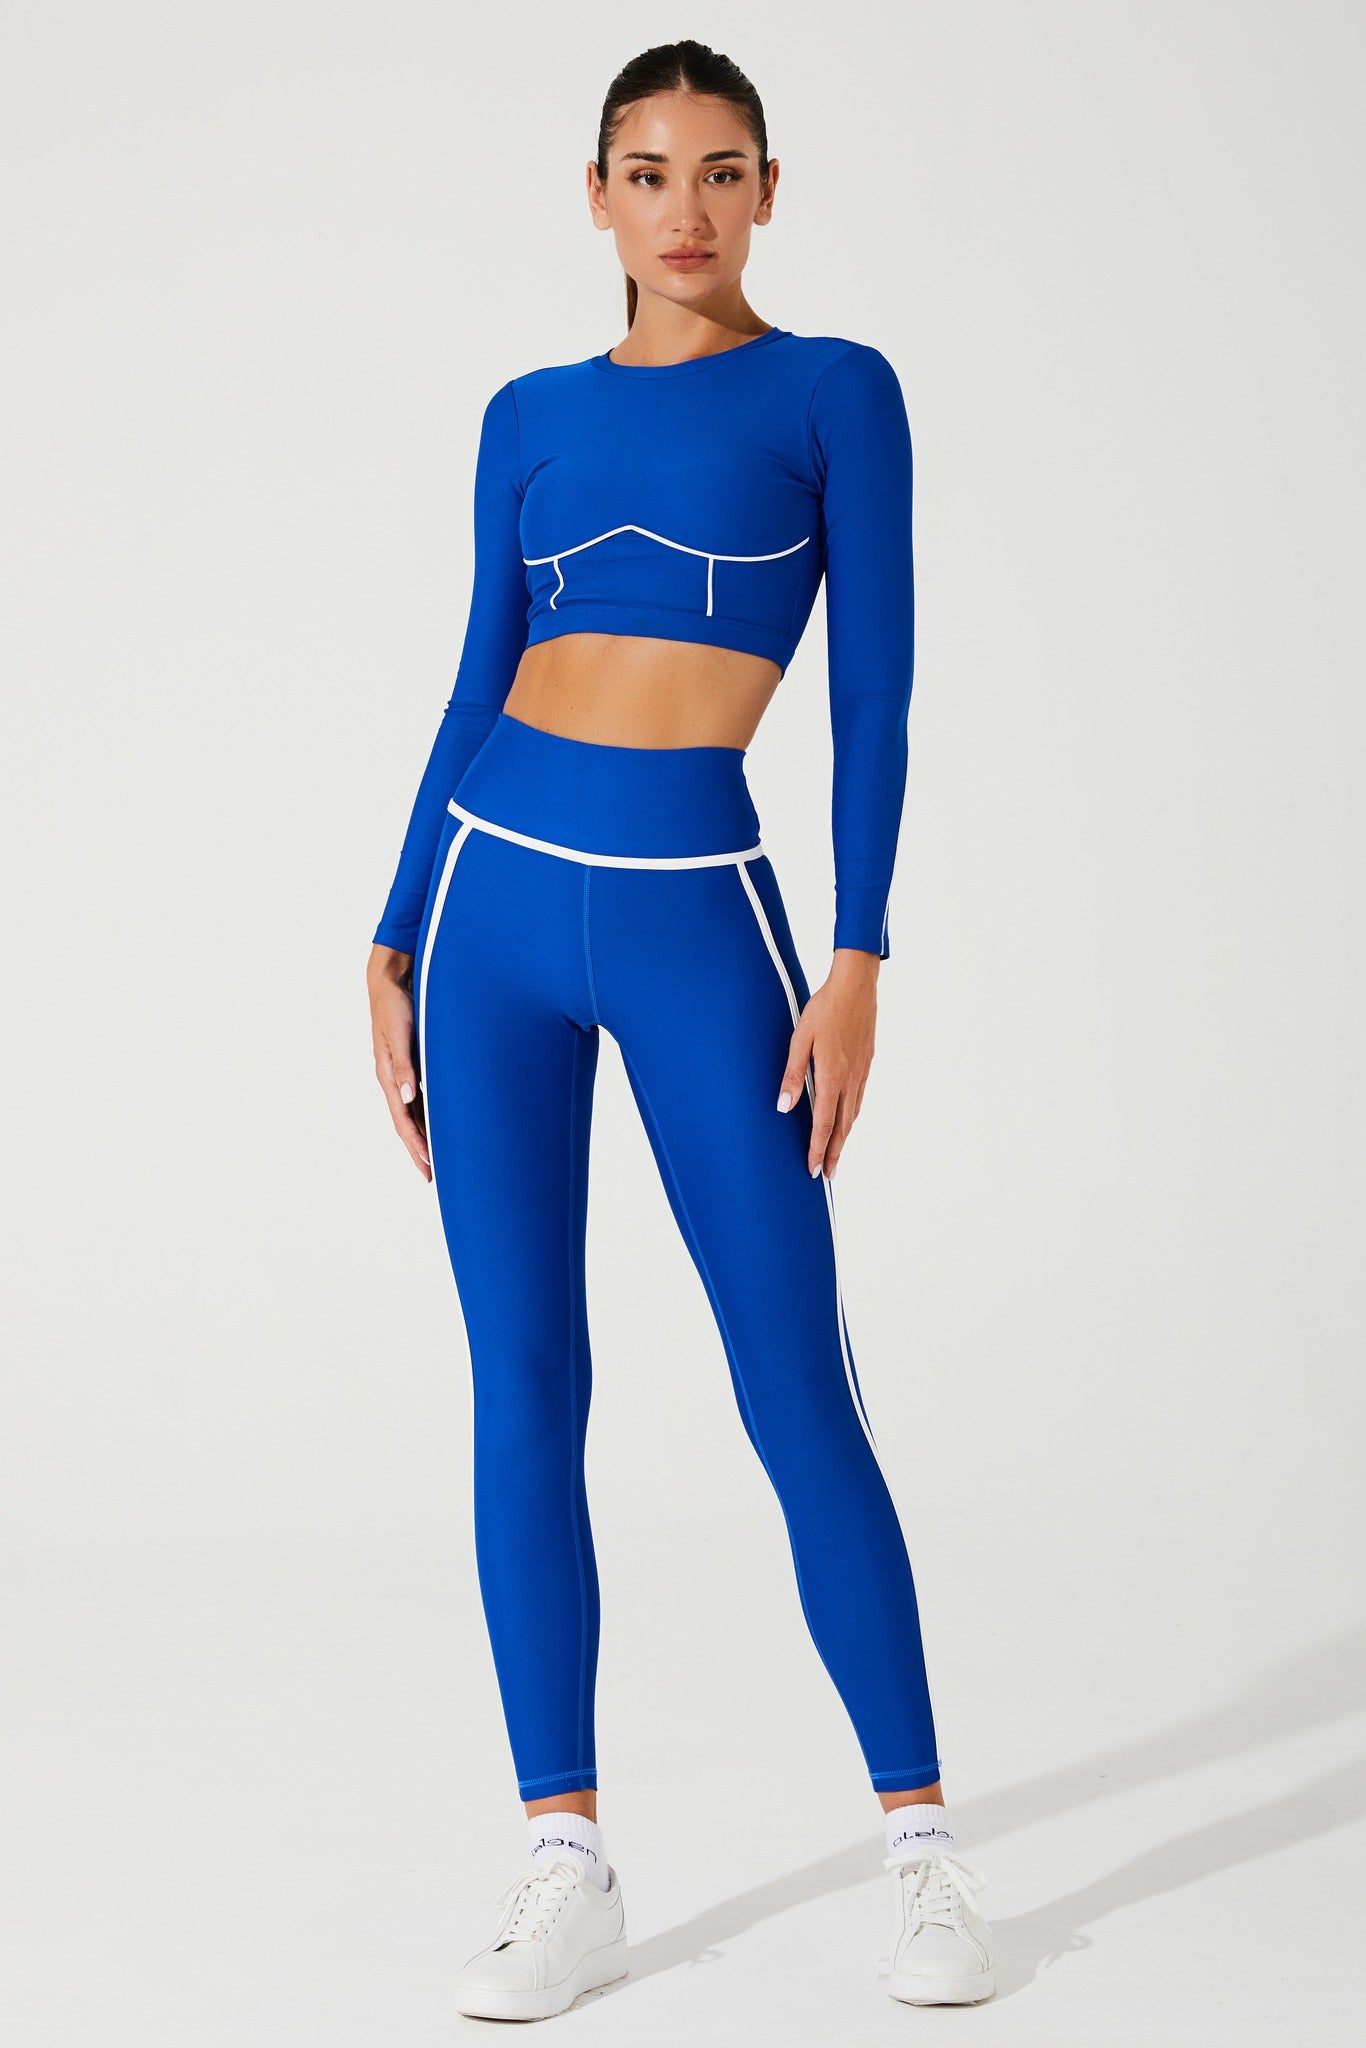 Stylish Atlantis Blue women's leggings with a ludic design, perfect for active wear.